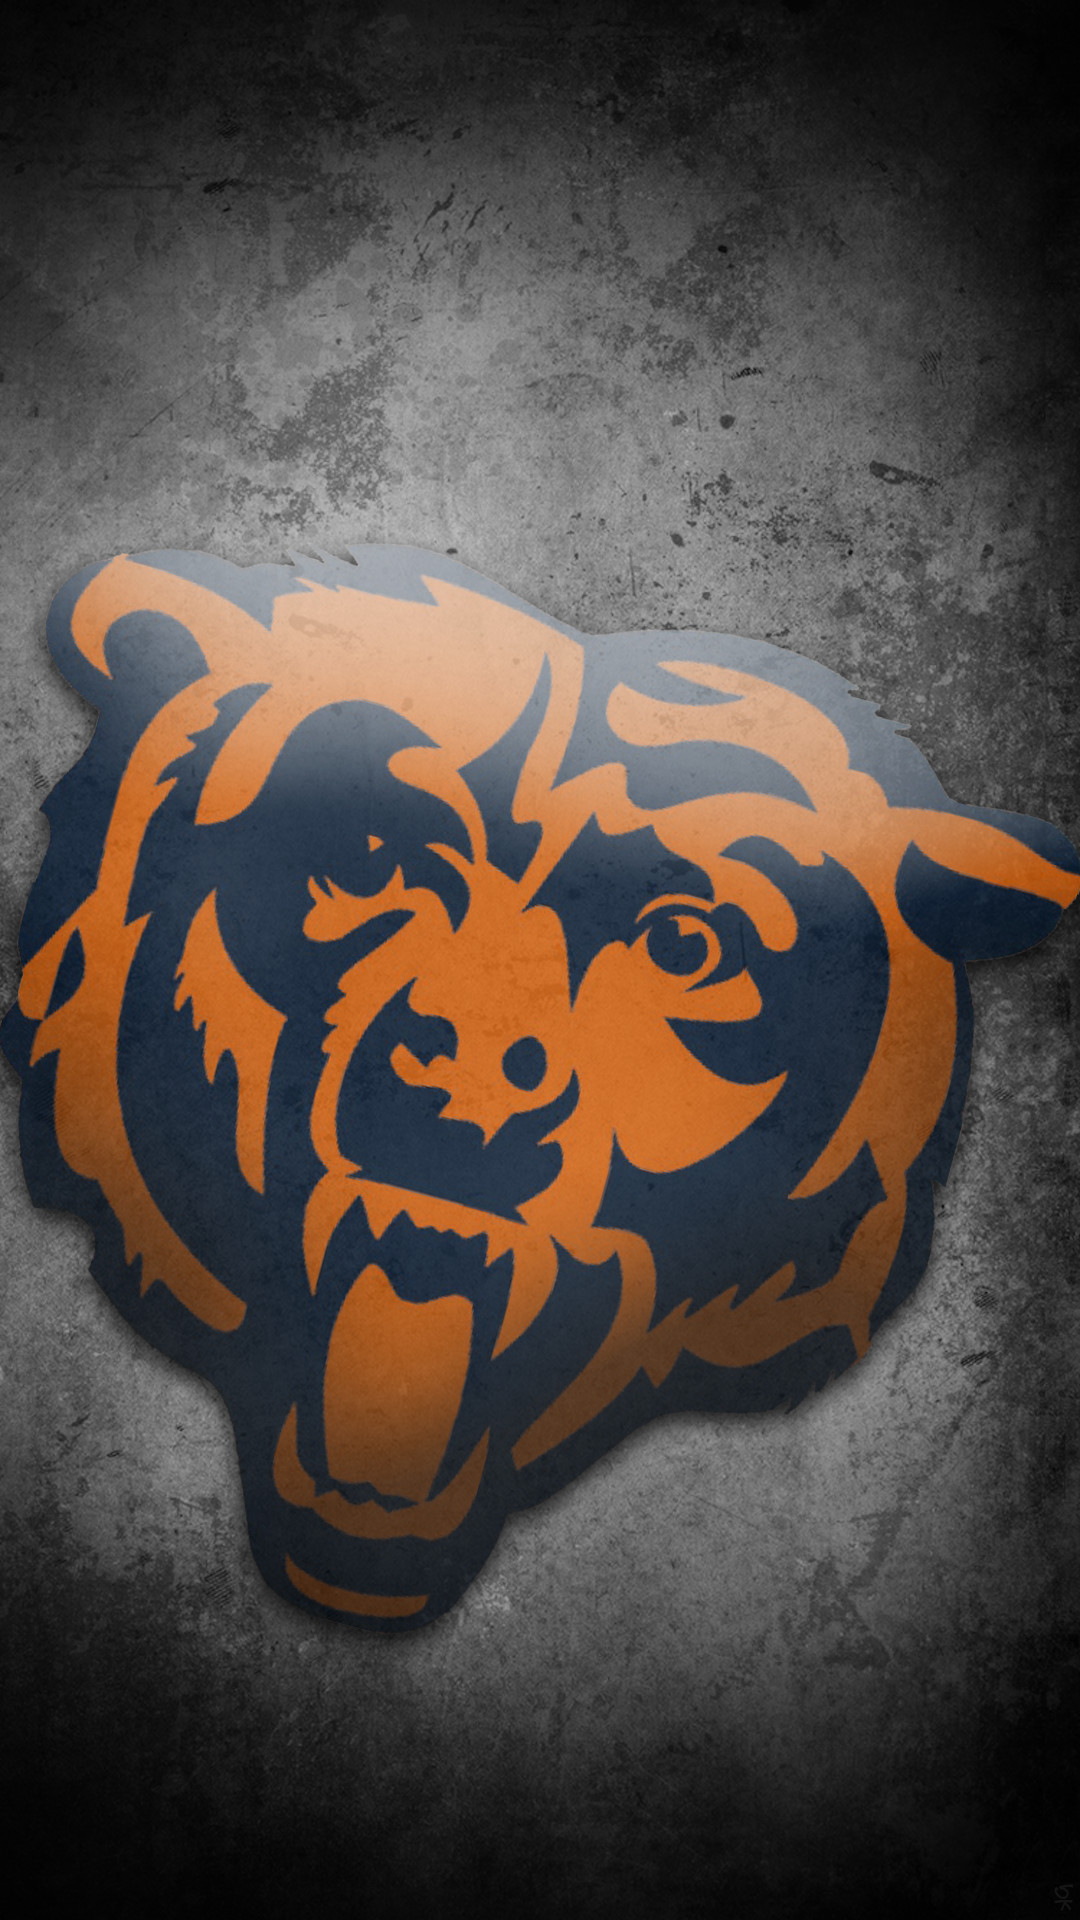 1080x1920 Chicago Bears Iphone Wallpapers Wallpaper Wiki